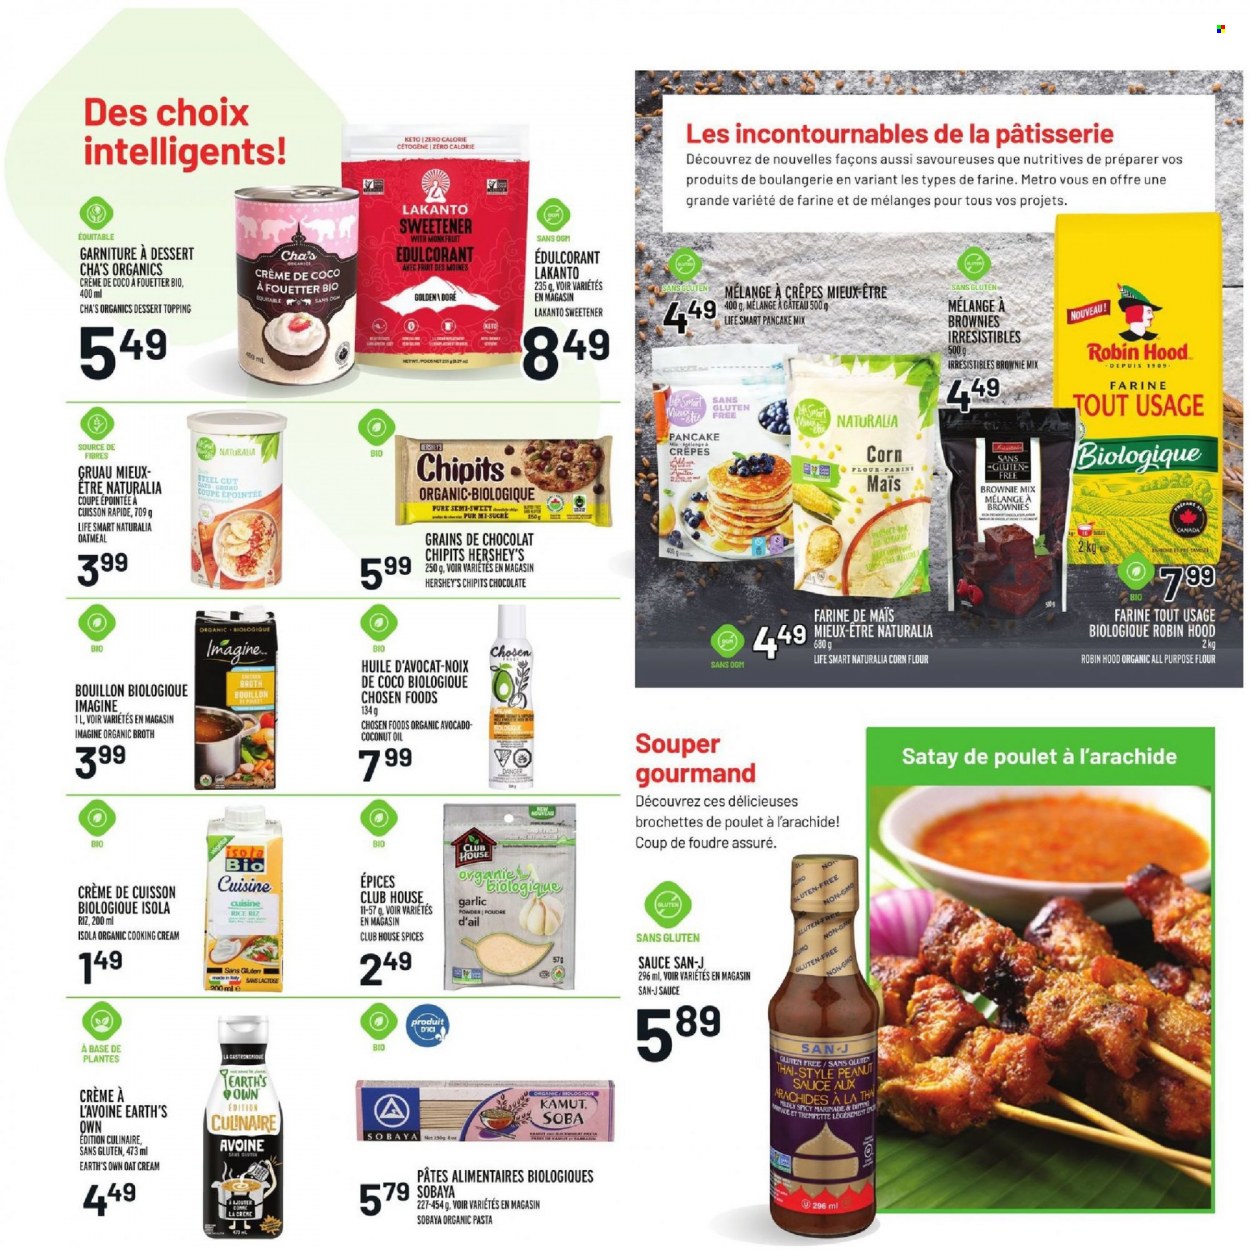 thumbnail - Metro Flyer - October 14, 2021 - October 20, 2021 - Sales products - brownie mix, corn, garlic, avocado, pasta, sauce, pancakes, Hershey's, chocolate, all purpose flour, bouillon, flour, oatmeal, oats, corn flour, topping, broth, sweetener, rice, marinade, coconut oil, oil. Page 3.